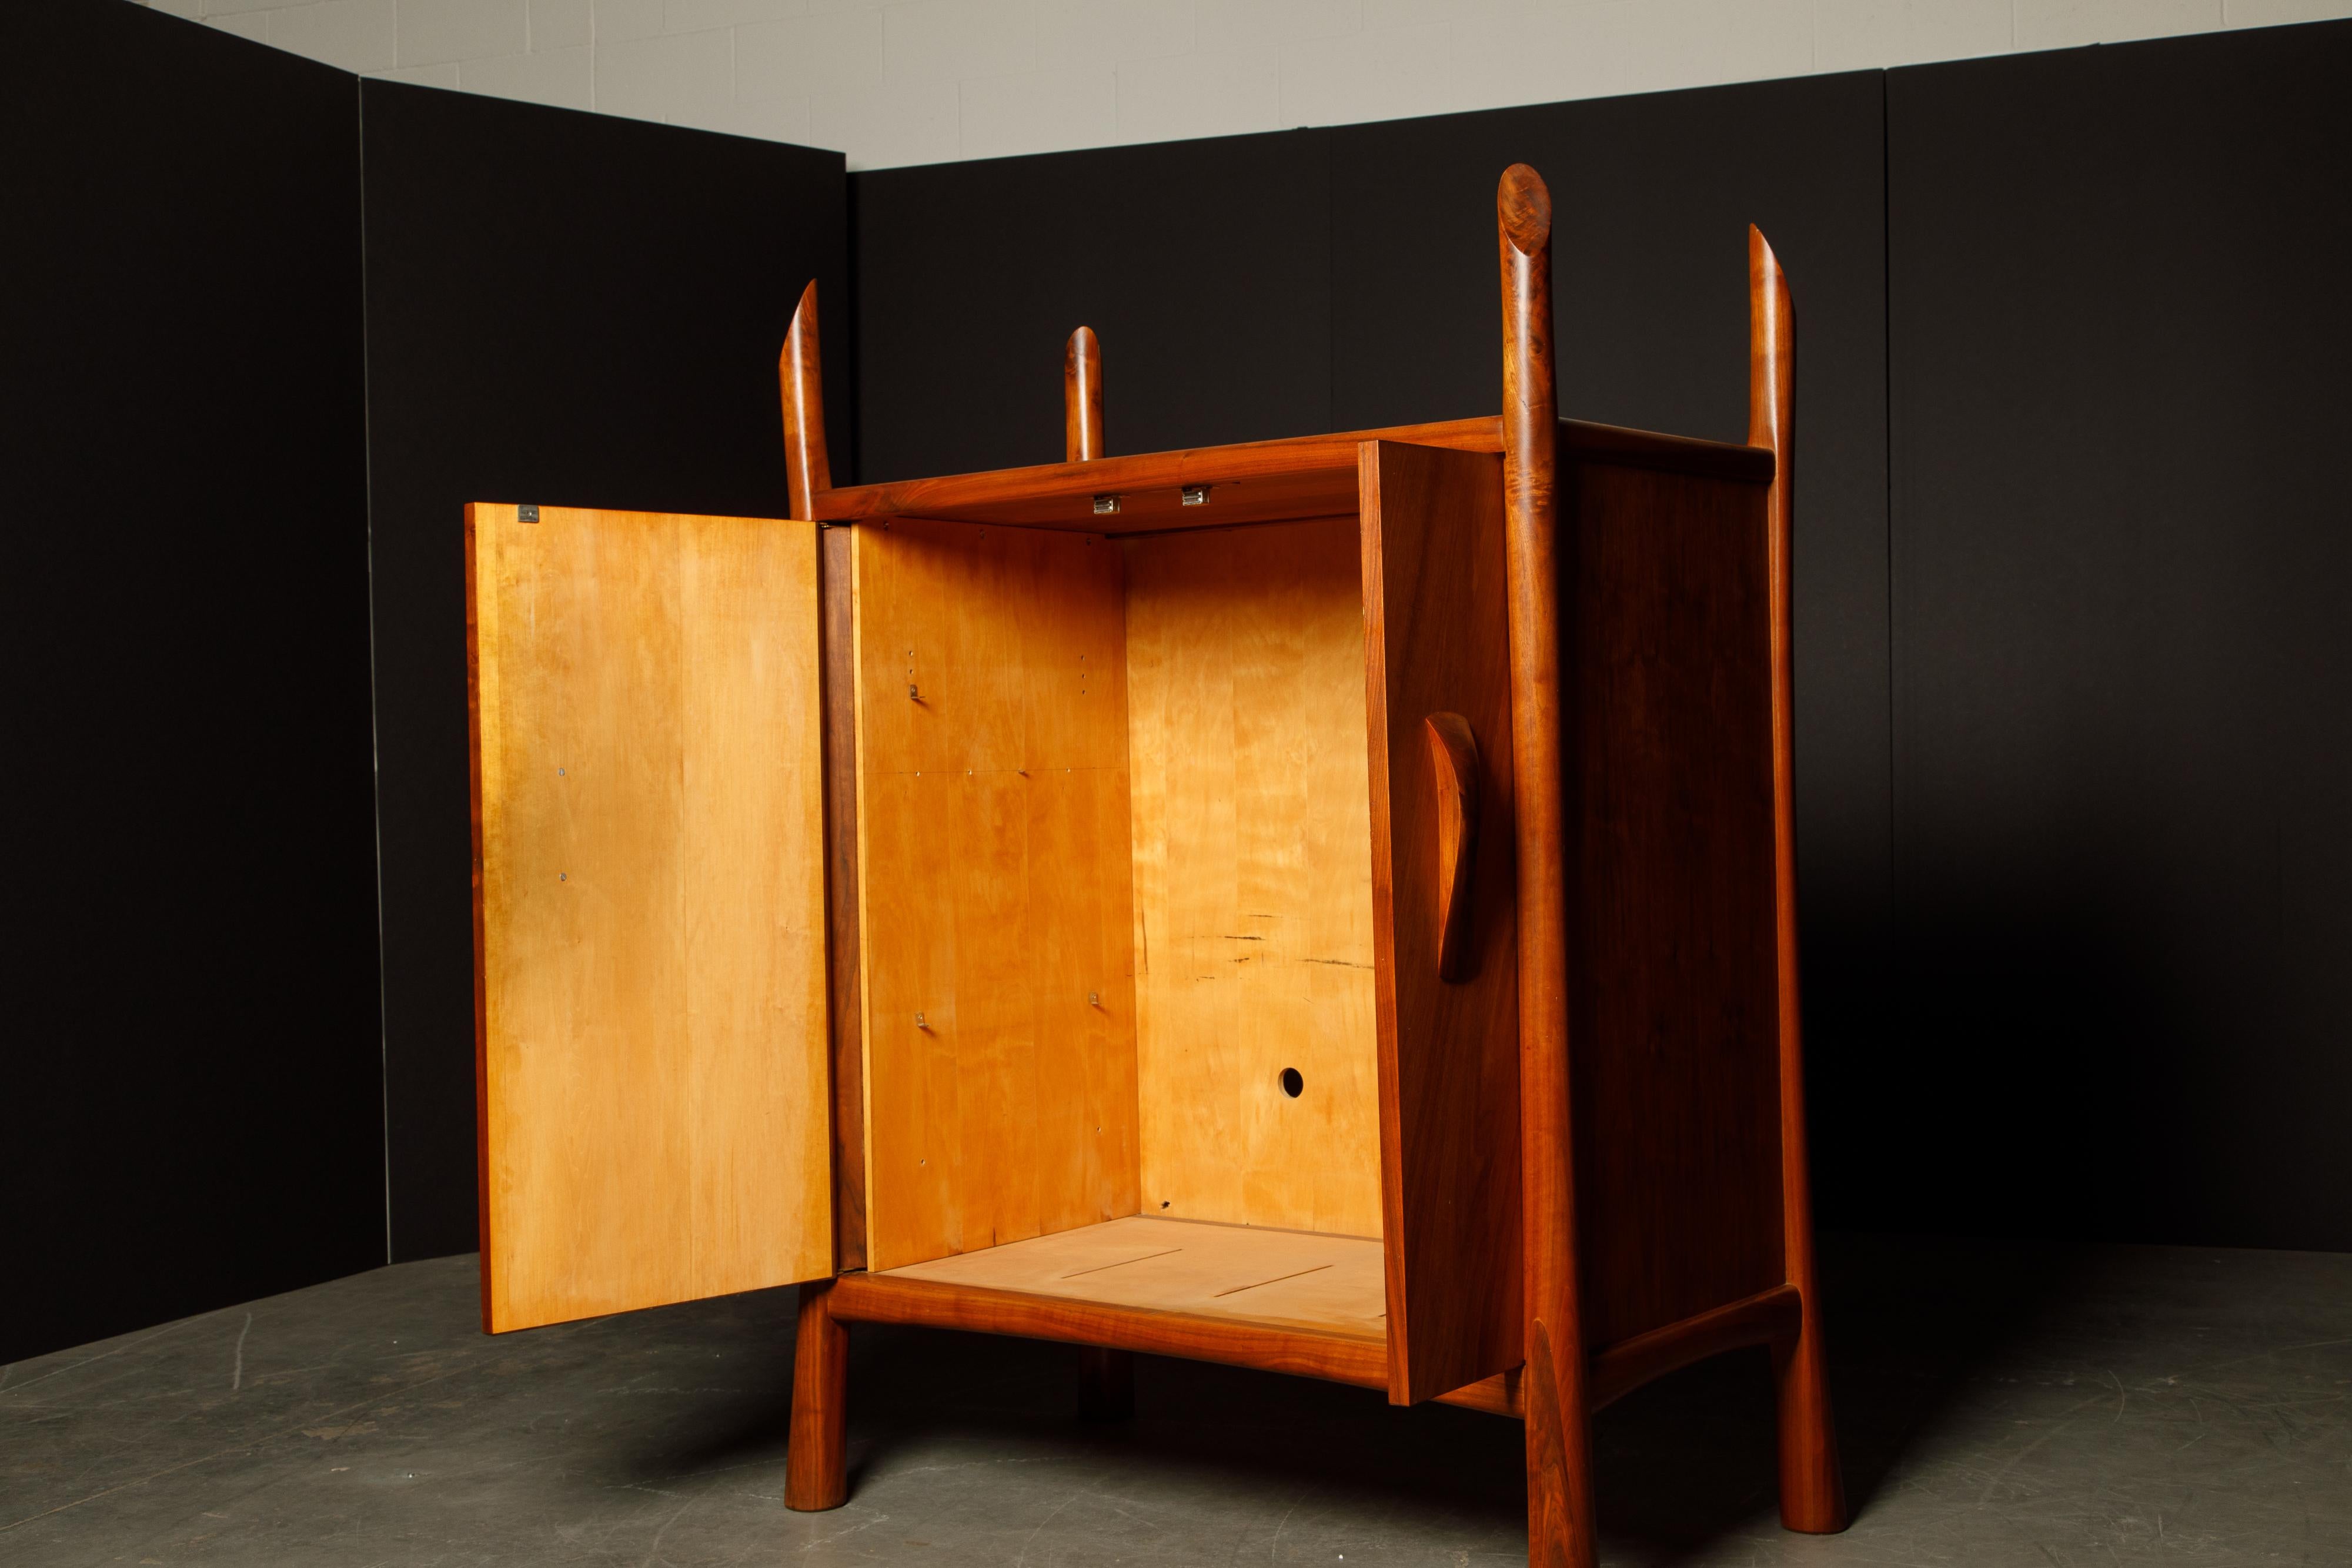 Robert Whitley Sculptural Walnut Studio Craftsman Cabinet, New Hope PA, 1970s In Good Condition For Sale In Los Angeles, CA